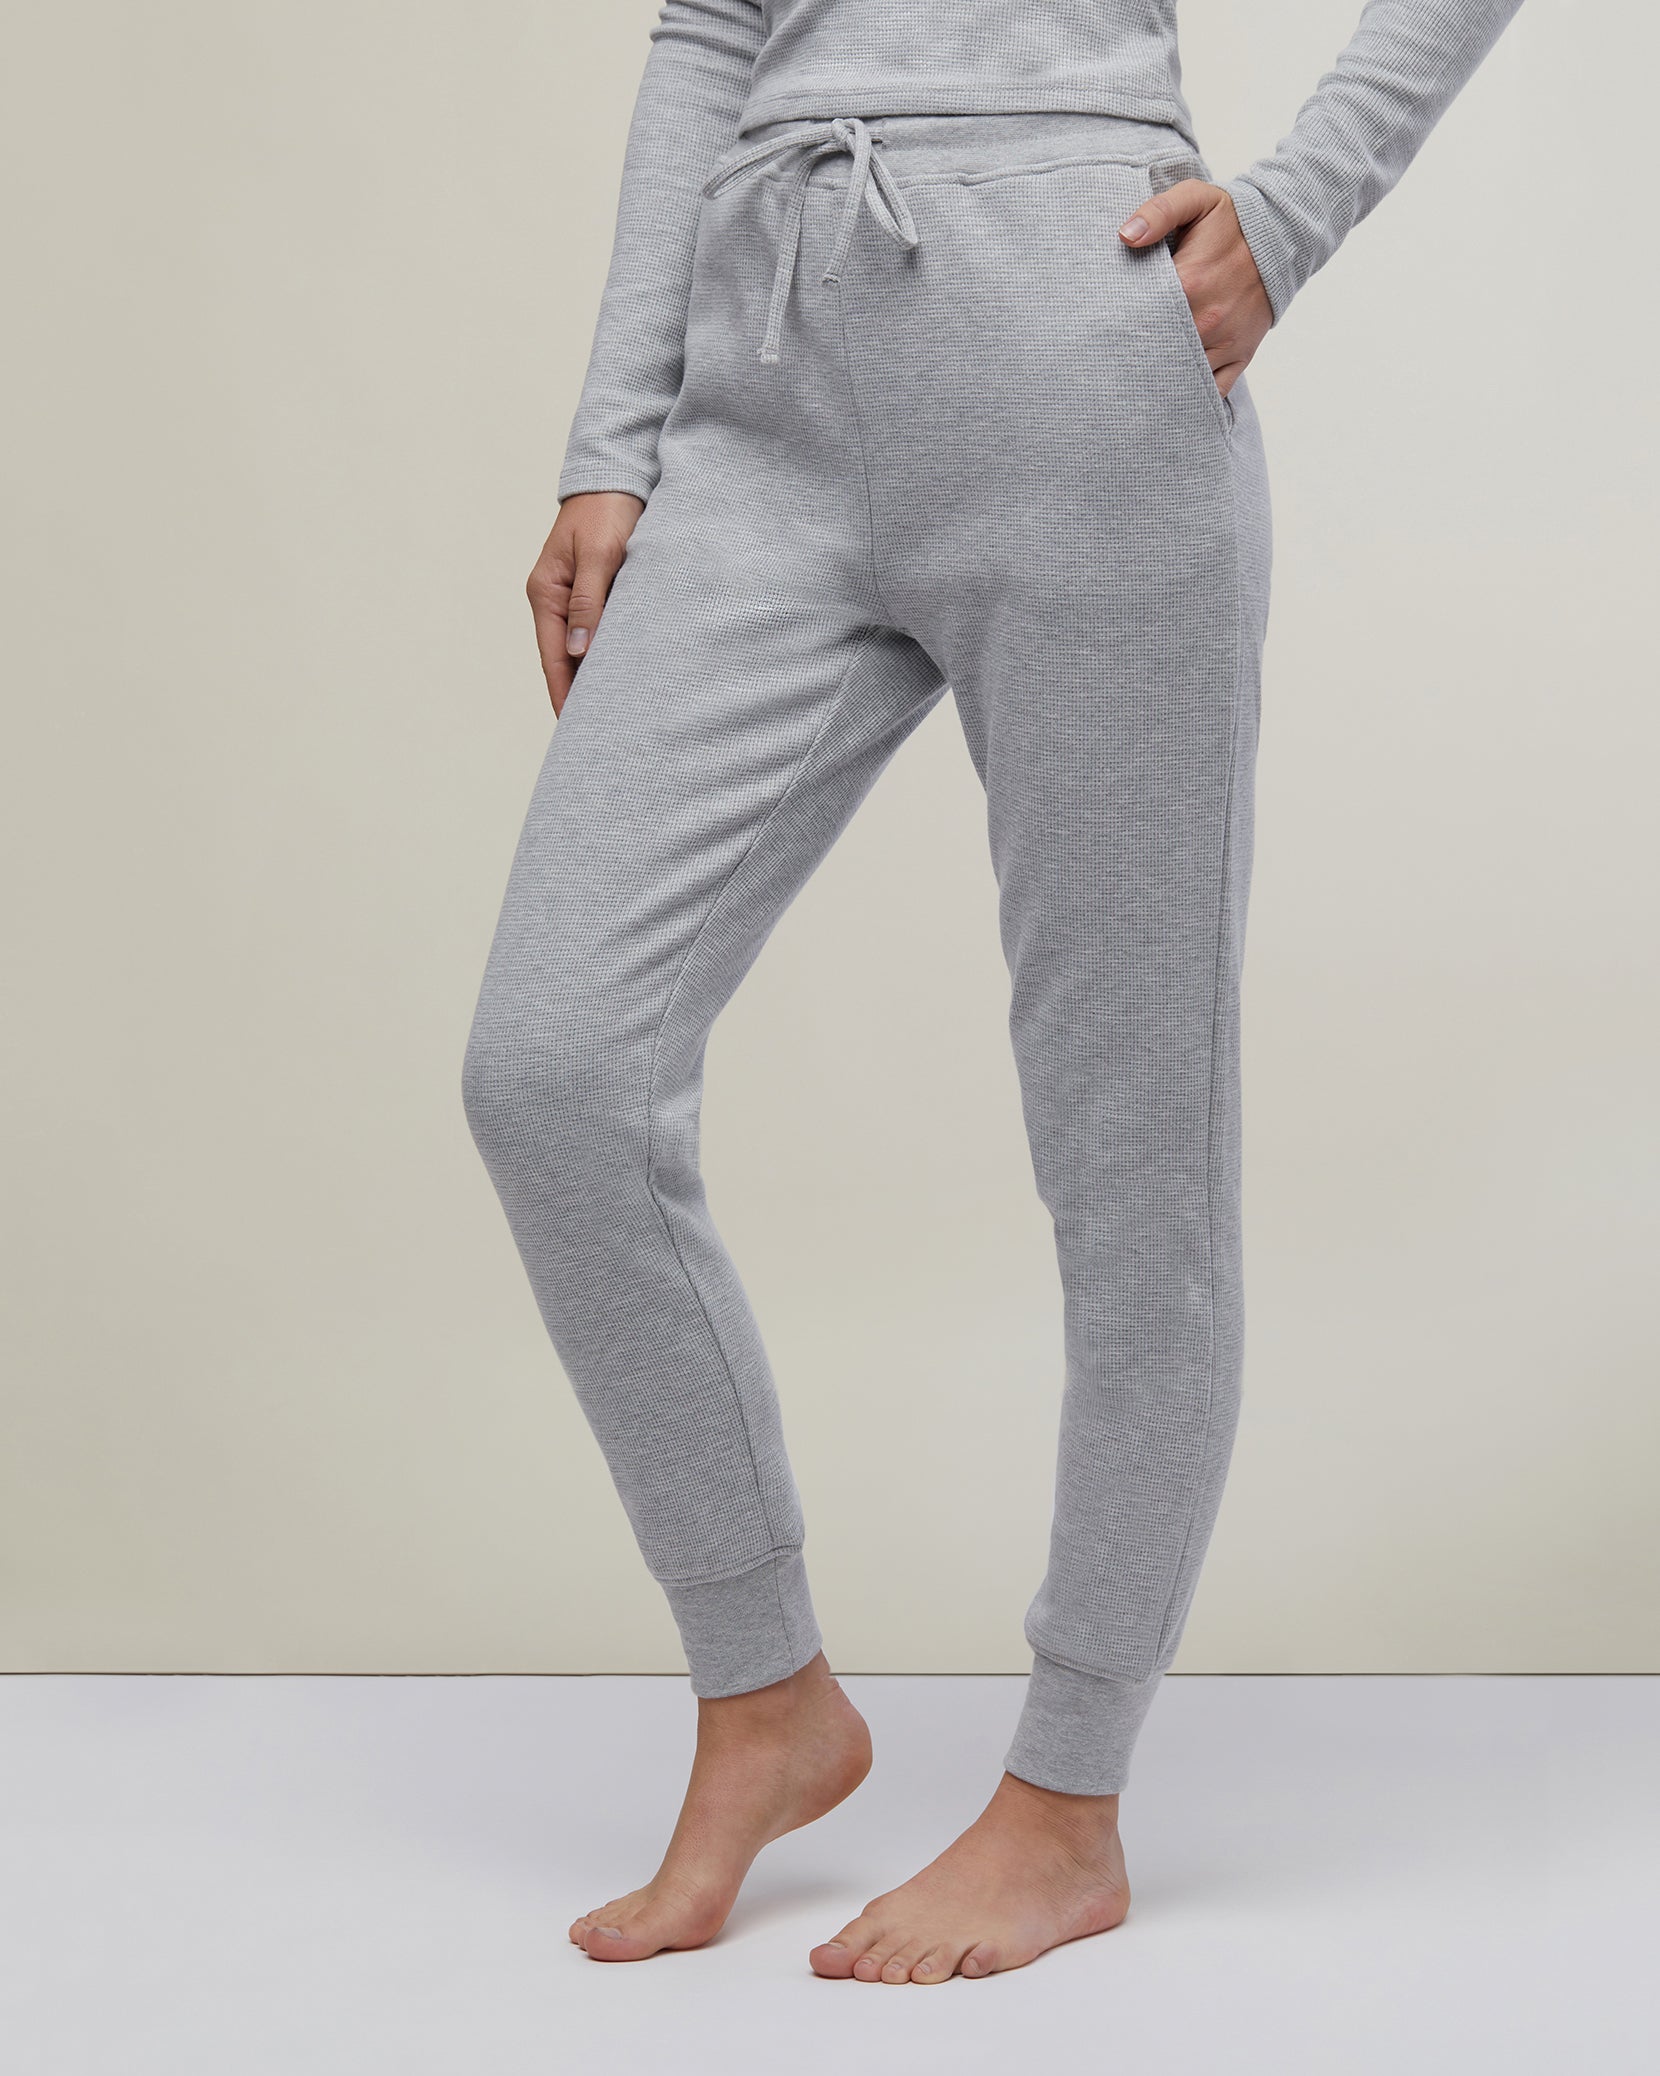 People Love These $23 Waffle Knit Joggers So Much, They're Buying